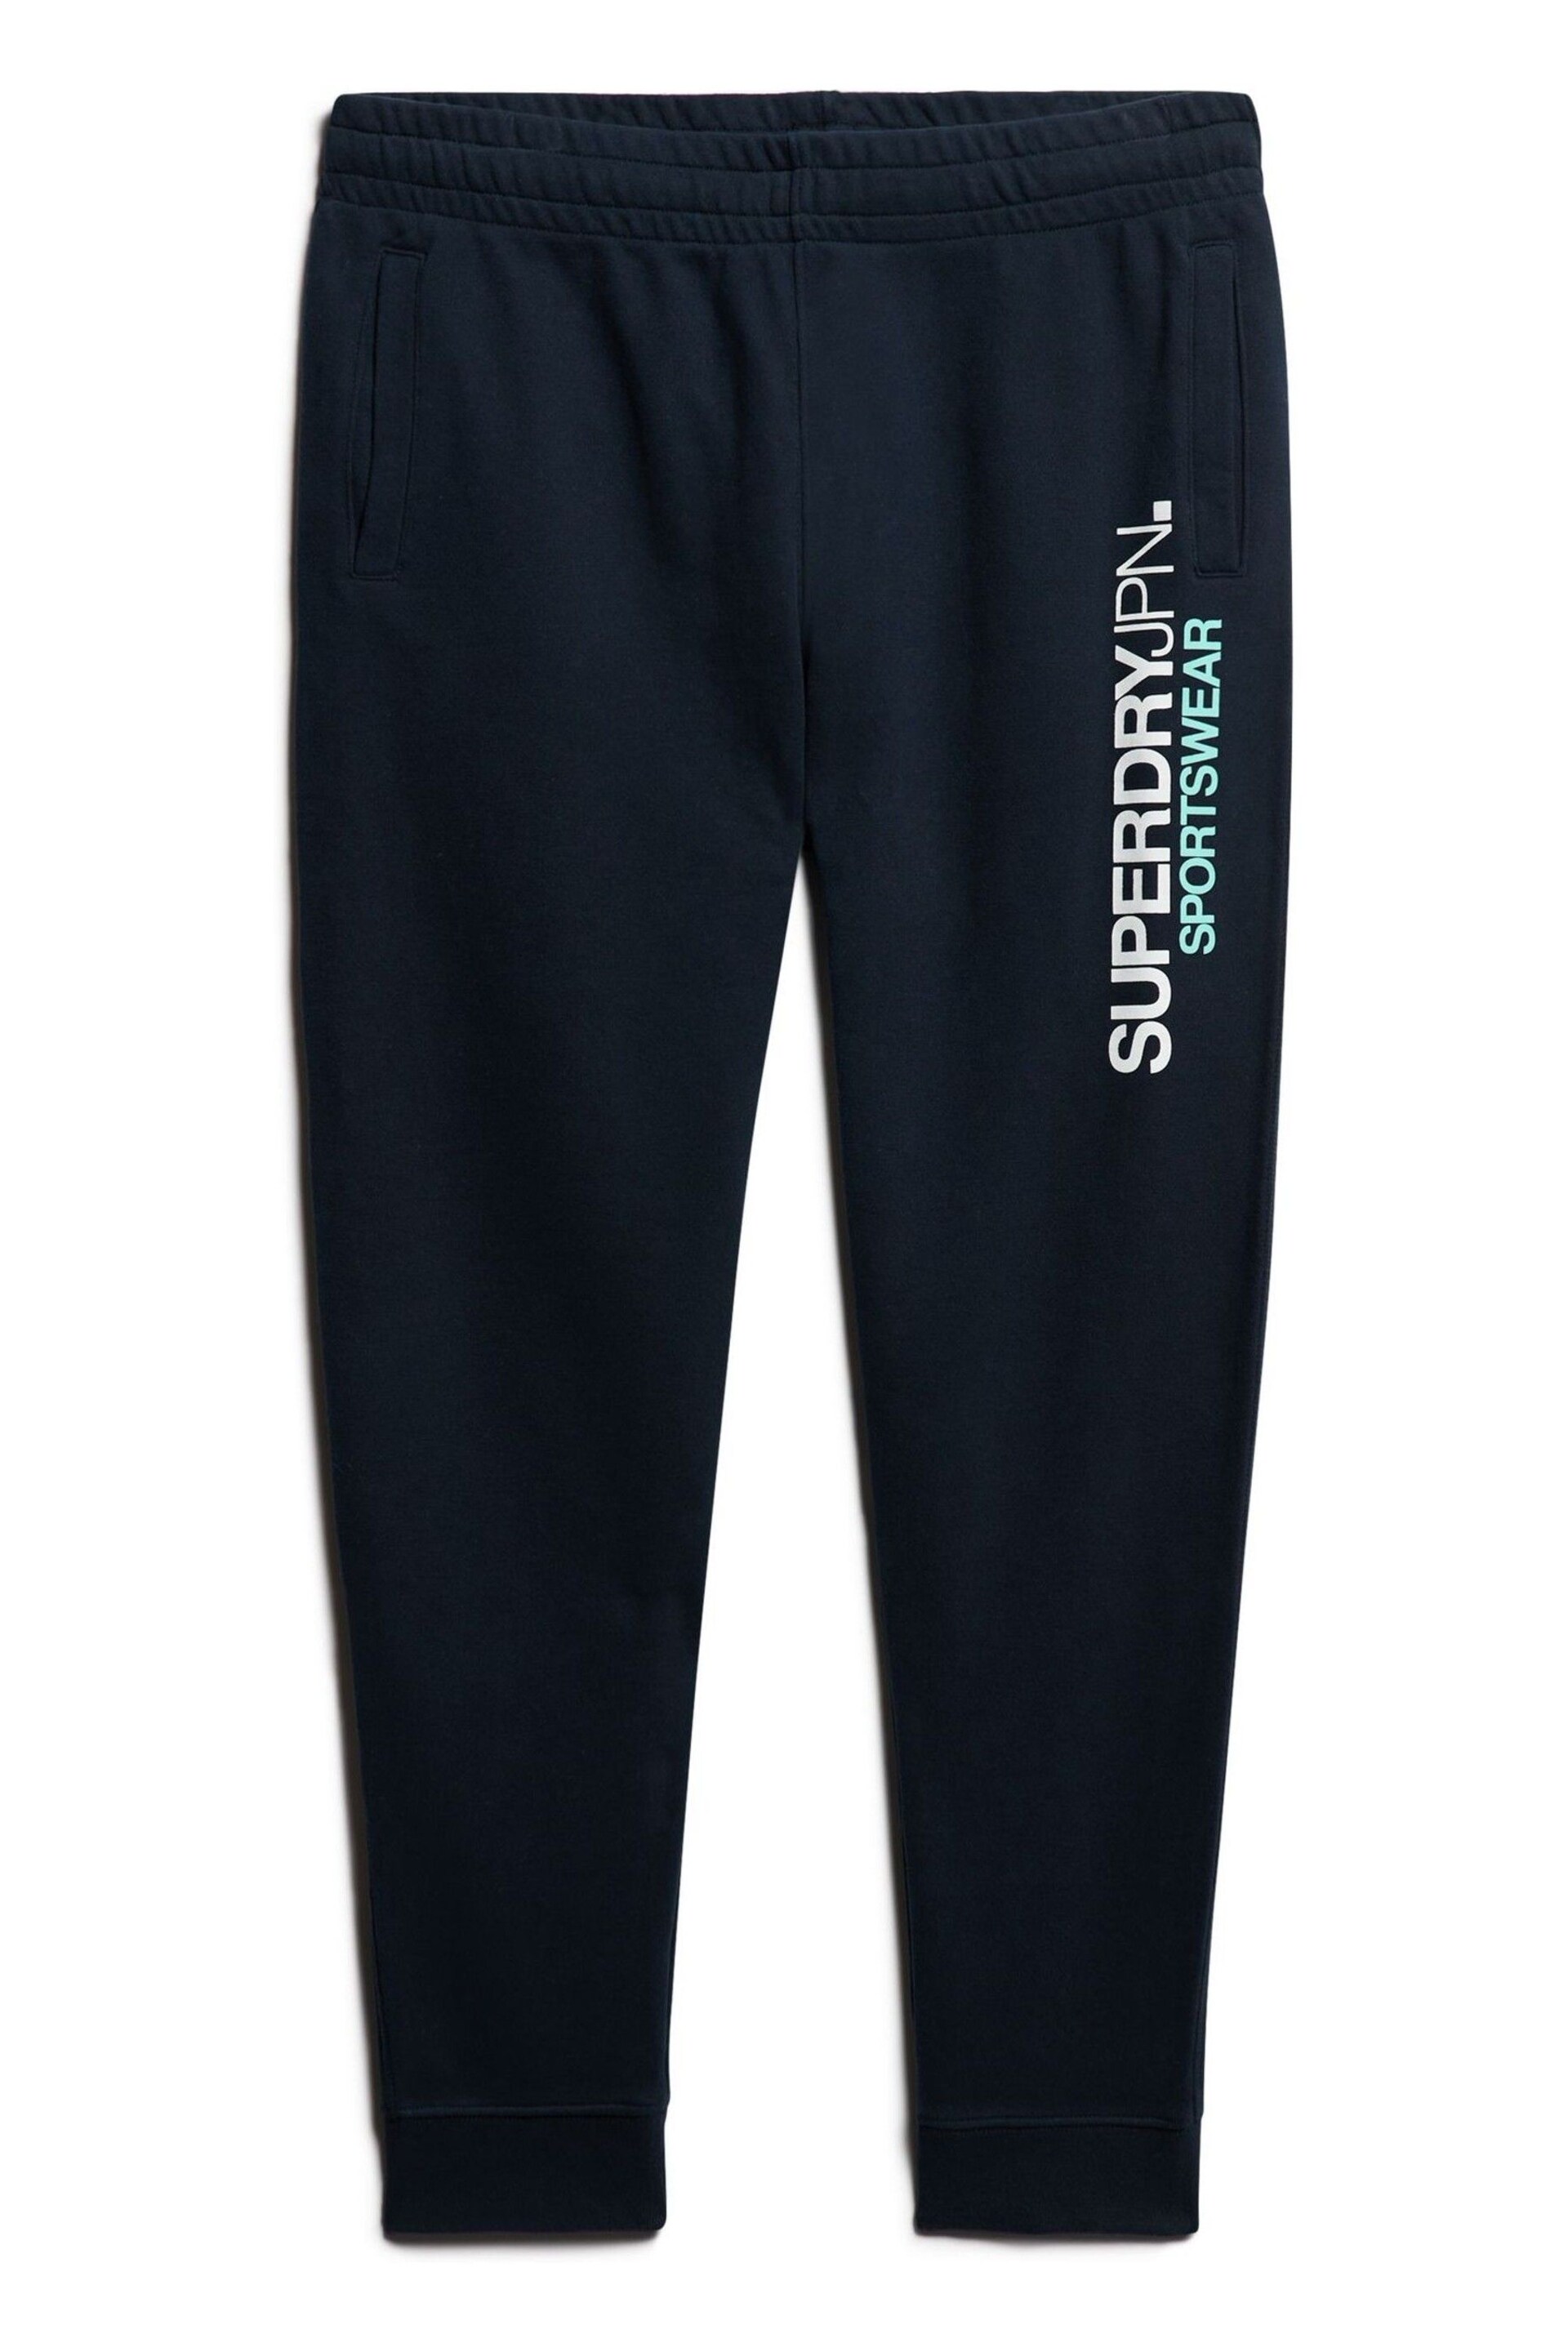 Superdry Blue Sportswear Logo Tapered Joggers - Image 5 of 6